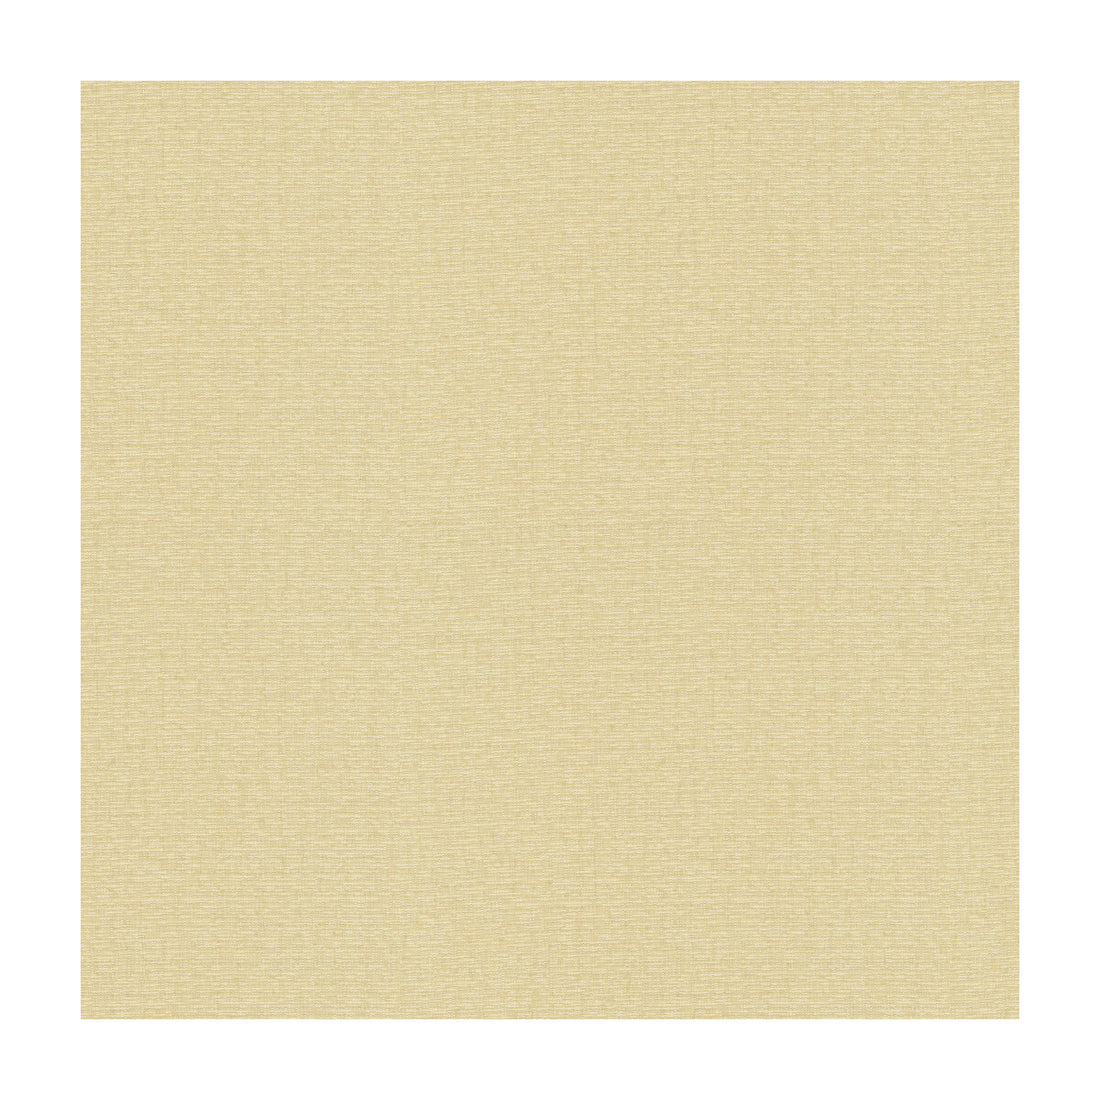 Kravet Contract fabric in 4156-16 color - pattern 4156.16.0 - by Kravet Contract